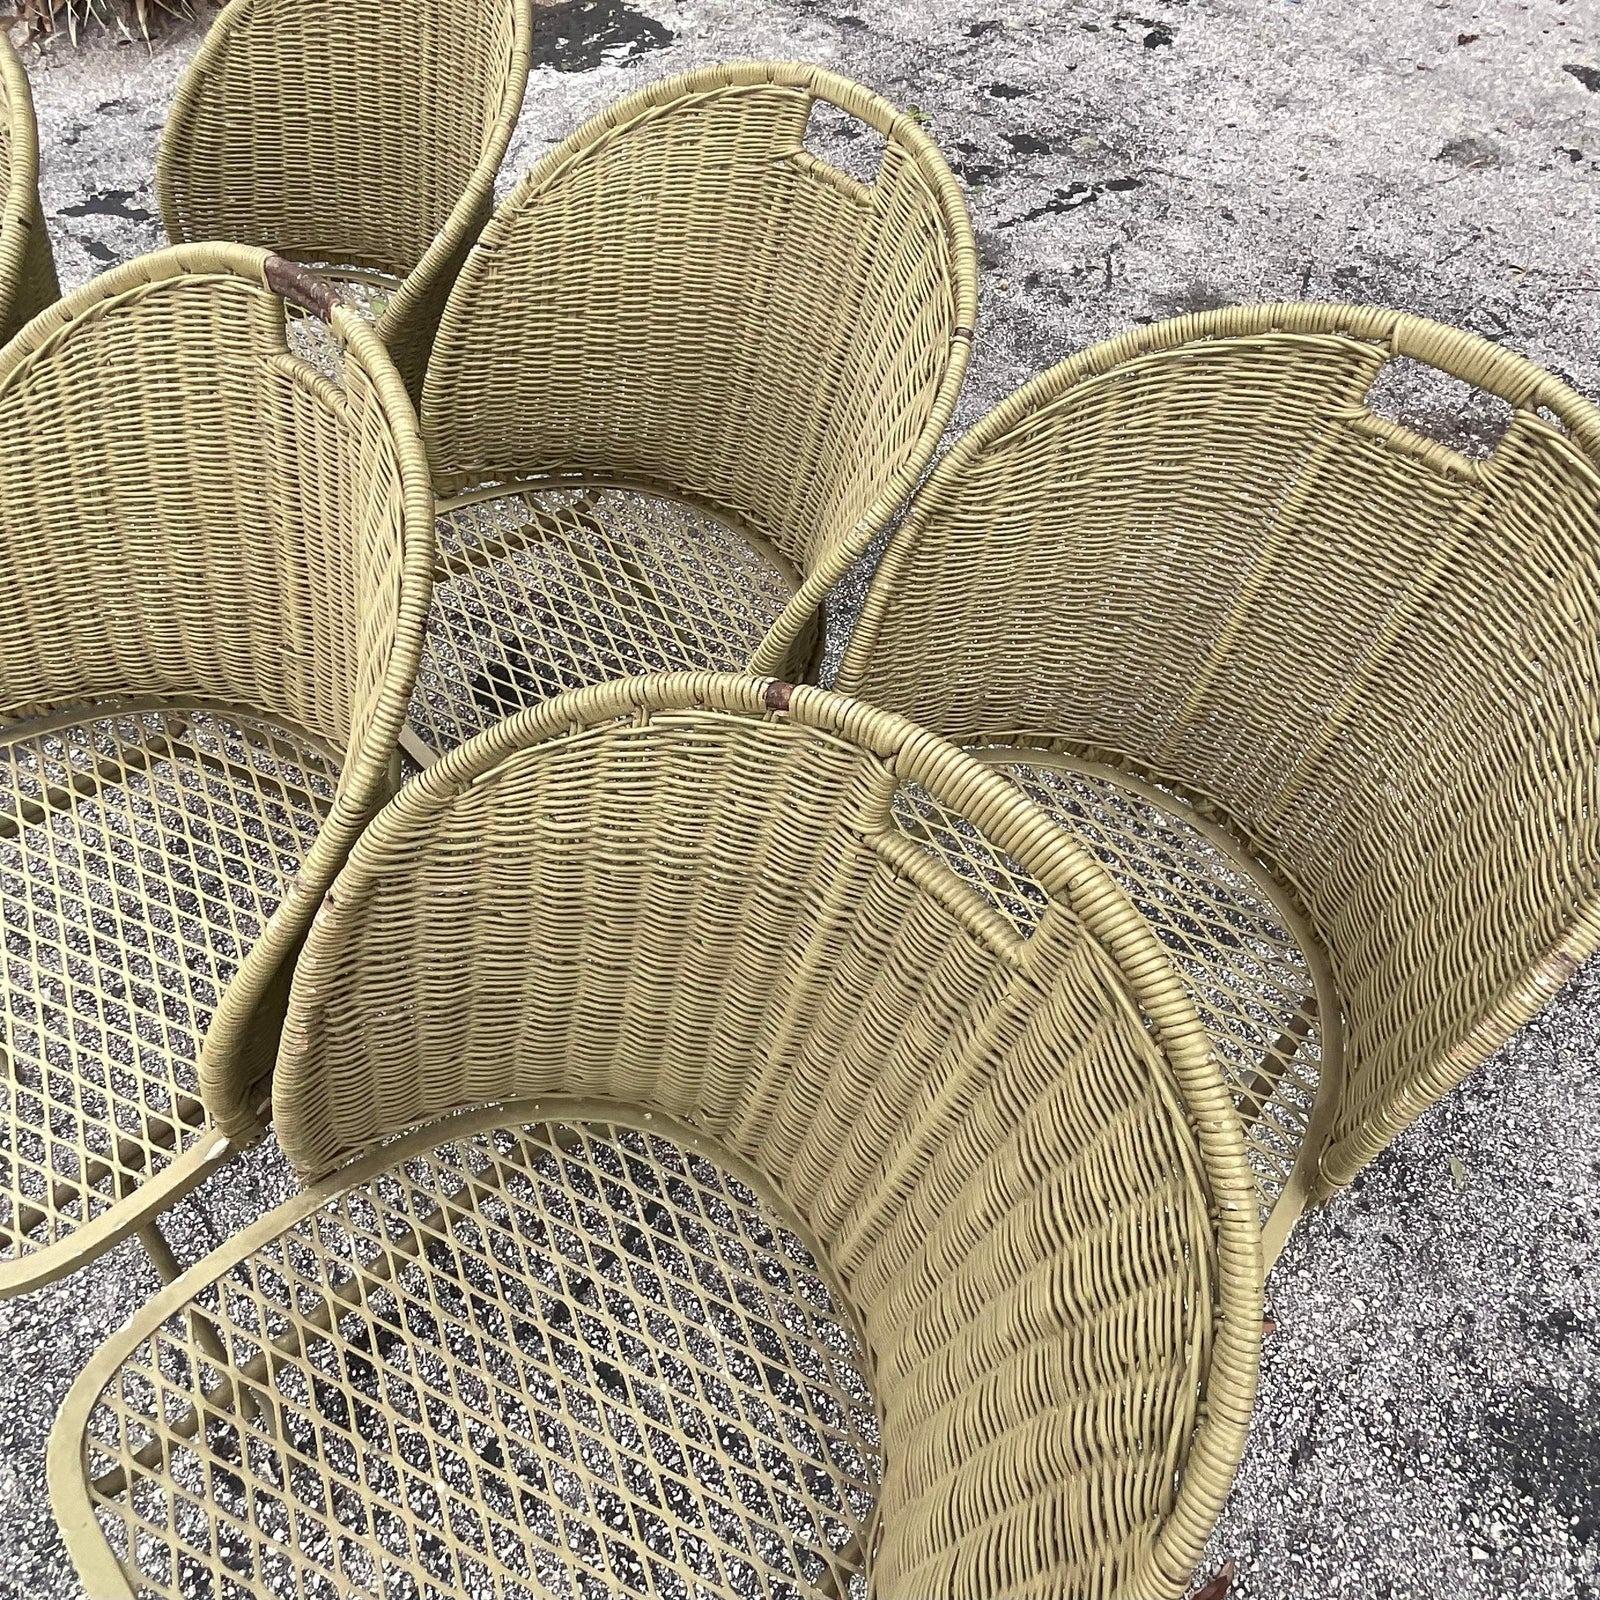 A fabulous set of 6 vintage MCM outdoor dining chairs. Designed by Maurizio Tempestini for the Salterini group. Unmarked. Chic wrought iron frame with a woven rattan back panel. These chairs have an incredible patina from time. It’s so perfect that